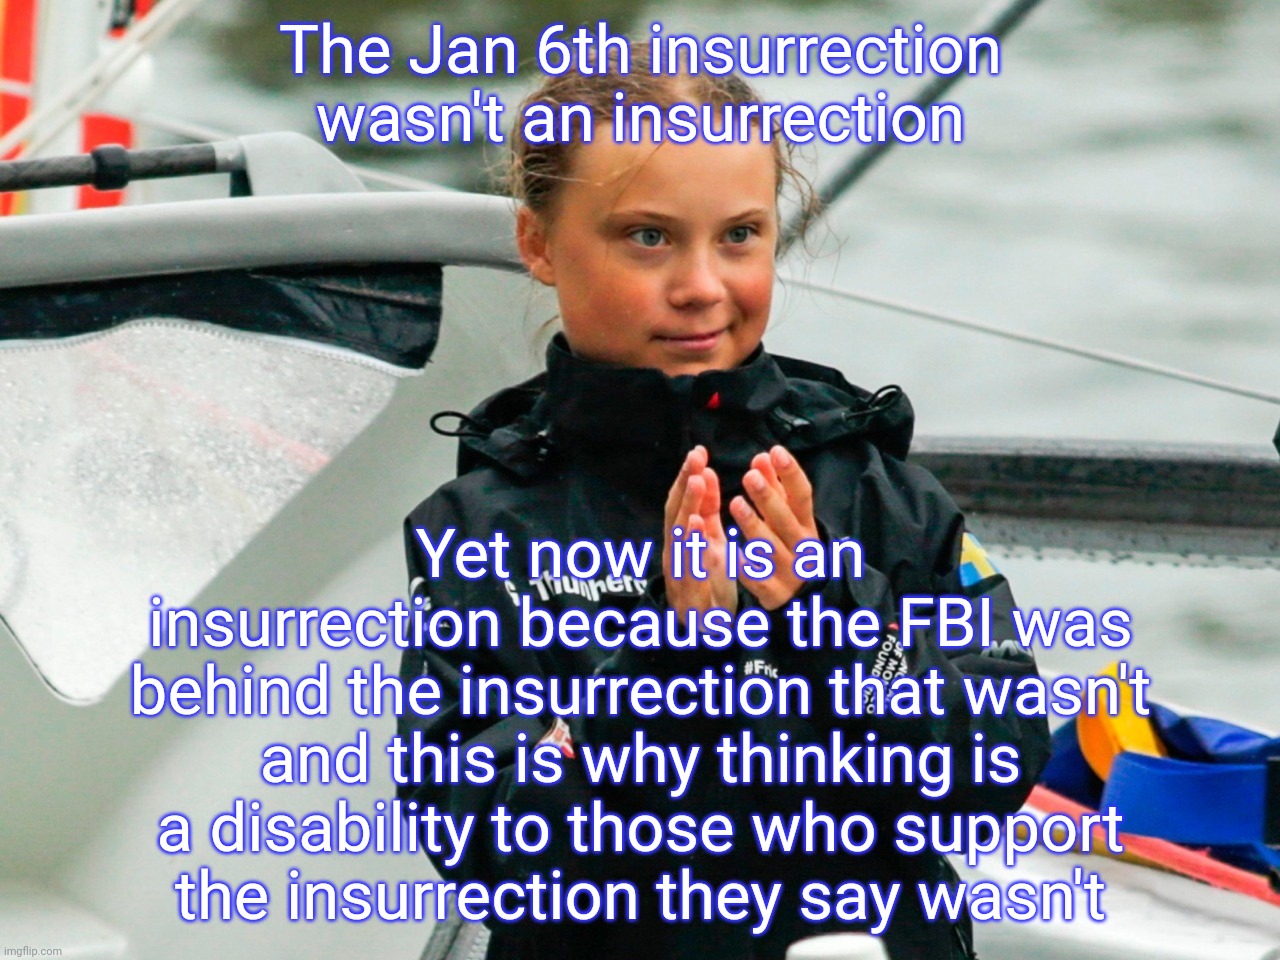 Greta Thunberg slow clap from hell | The Jan 6th insurrection wasn't an insurrection Yet now it is an insurrection because the FBI was behind the insurrection that wasn't and th | image tagged in greta thunberg slow clap from hell | made w/ Imgflip meme maker